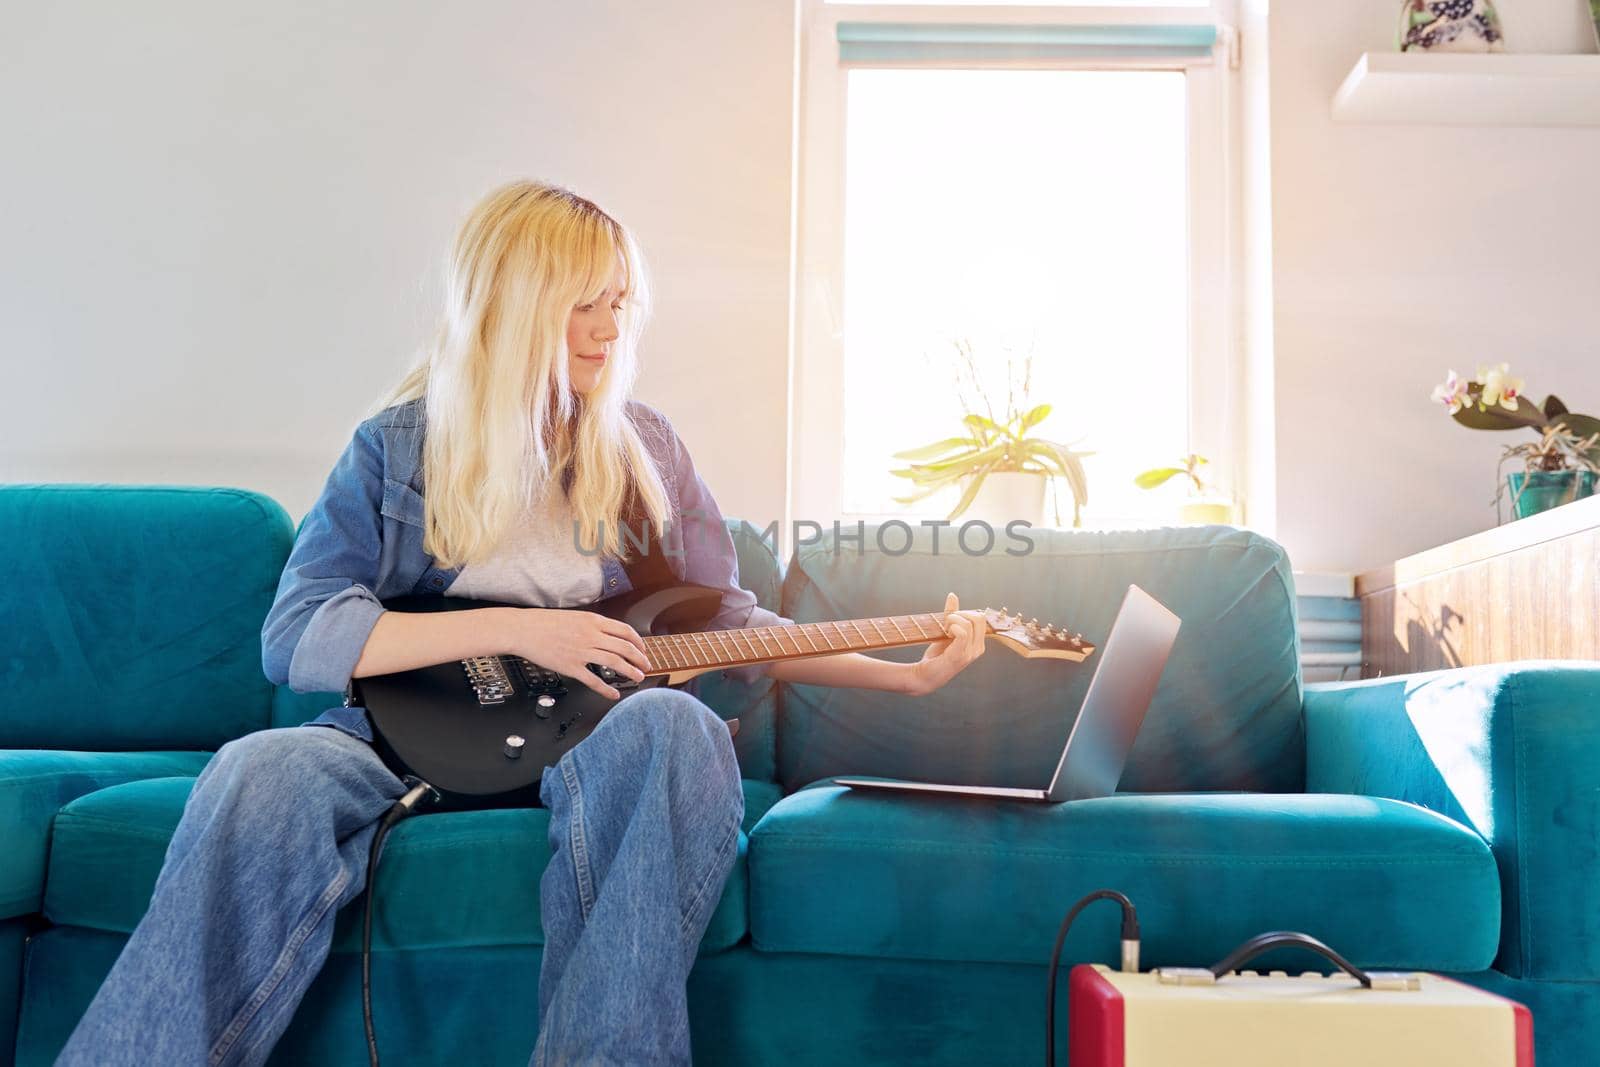 Hipster teenager girl playing electric guitar looking at laptop. Online learning music, songs, self-education, teen blogger musician recording video blog vlog, teaching, taking musical online courses